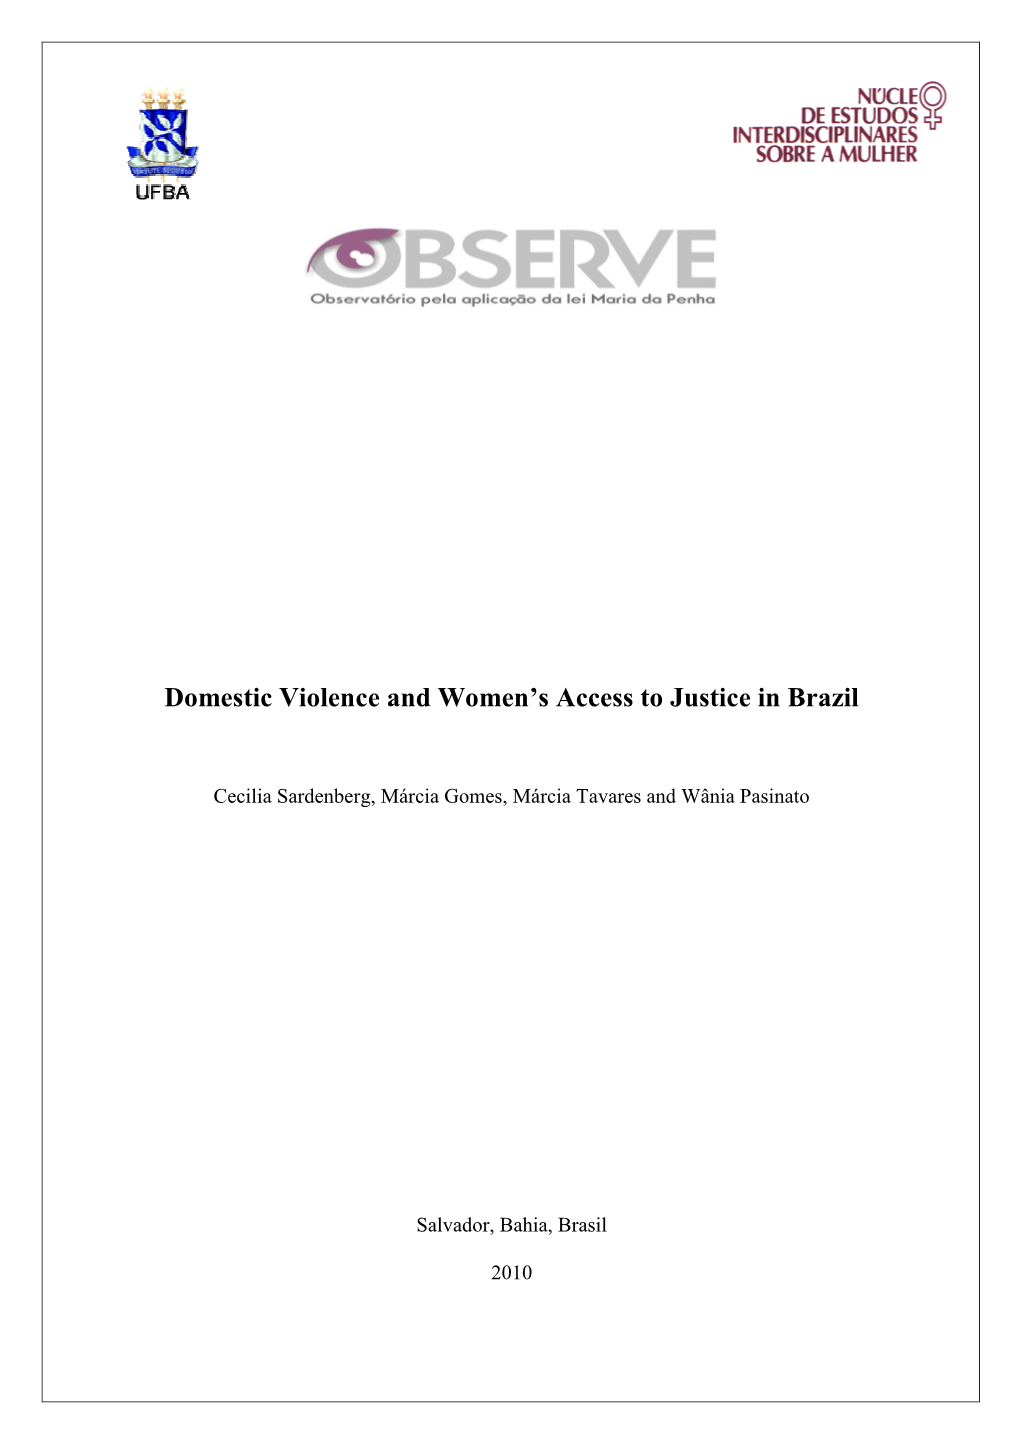 Domestic Violence and Women's Access to Justice in Brazil